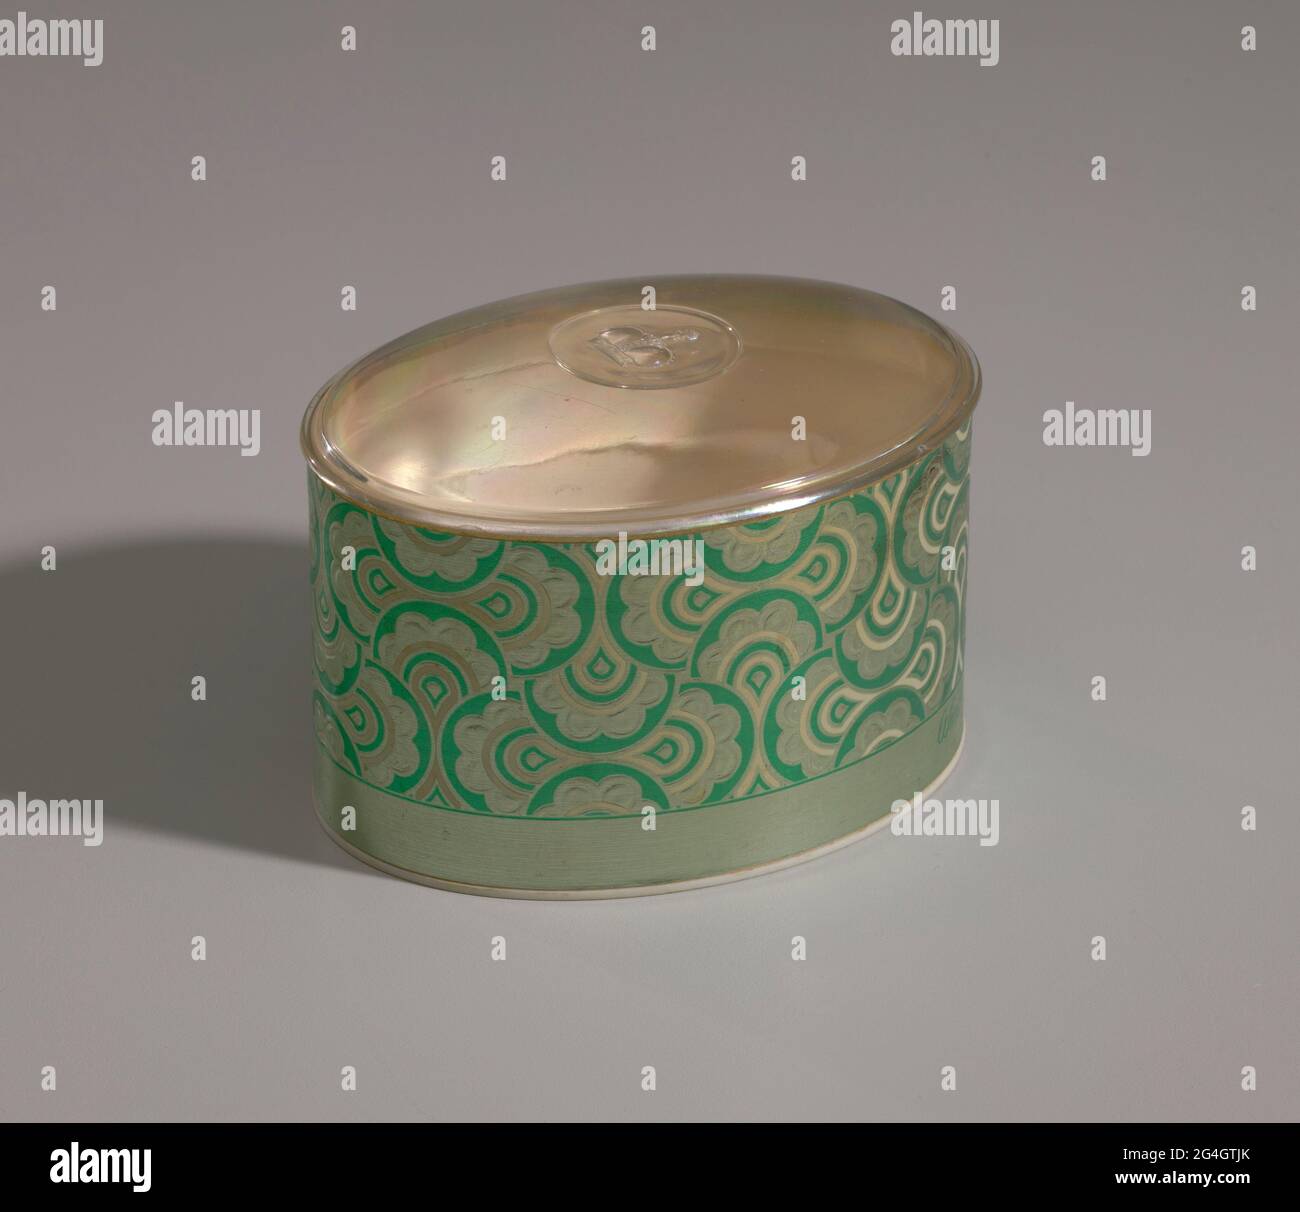 https://c8.alamy.com/comp/2G4GTJK/an-empty-makeup-box-for-loose-powder-the-ovular-container-a-is-covered-on-the-exterior-sides-with-green-and-gold-foil-in-a-stylized-floral-design-it-reads-quotwind-song-perfumed-dusting-powderquot-in-green-along-the-bottom-edge-of-one-short-side-the-bottom-of-the-container-is-made-from-hard-white-plastic-with-molded-lettering-on-the-bottom-that-reads-quotprince-matchabelli-inc-dist-perfumed-dusting-powder-net-wt-5-oz-greenwich-conn-06830quot-the-interior-of-the-container-is-lined-with-pasteboard-the-lid-b-is-made-from-clear-plastic-and-is-slightly-convex-with-a-mo-2G4GTJK.jpg